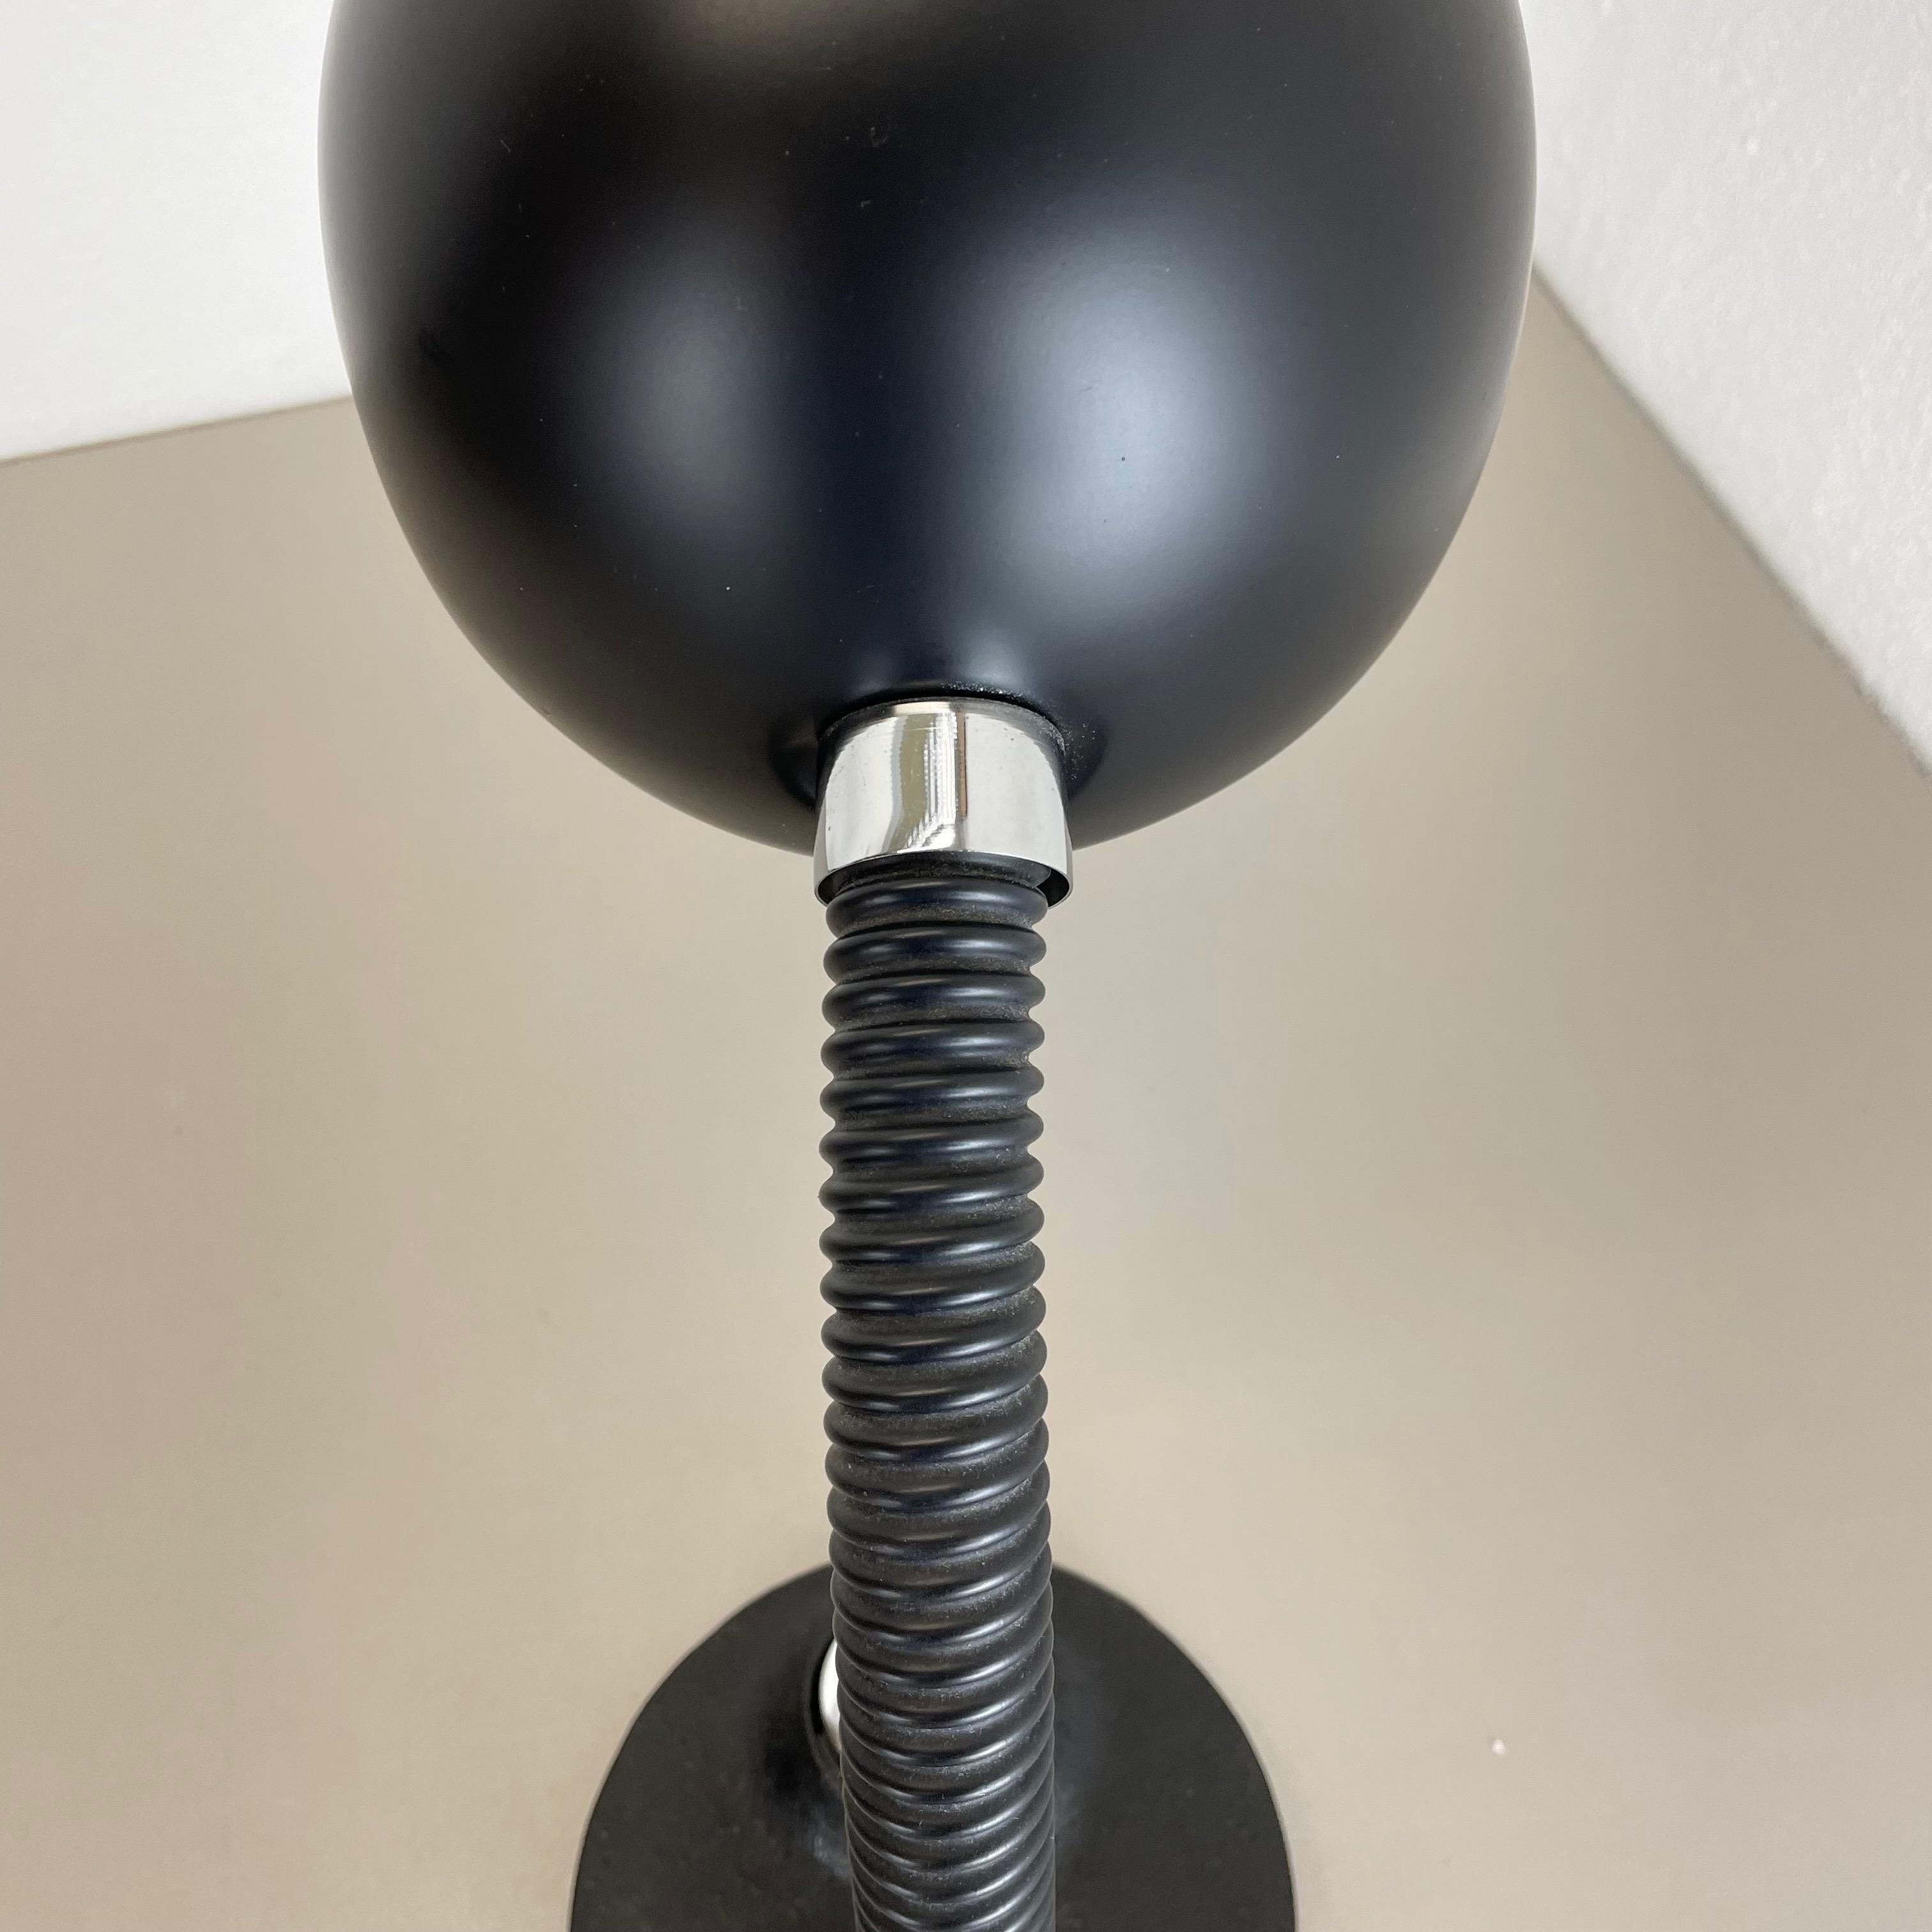 Modernist SPACE AGE Metal Table Light by Hillebrand Leuchten, Germany, 1970s For Sale 9